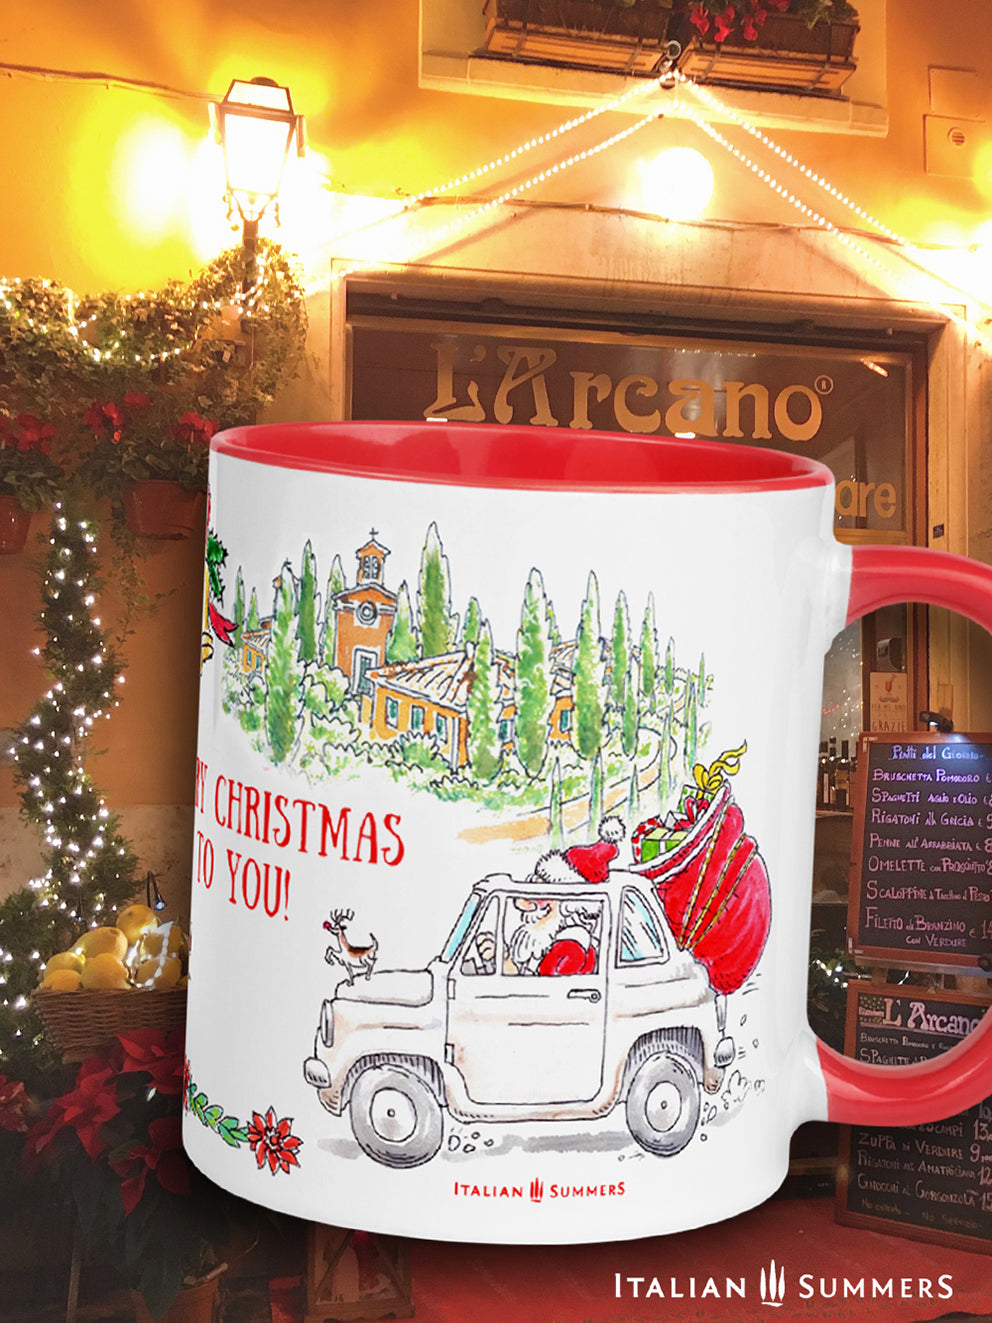 Italian Christmas mug! From Santa driving his Fiat 500 to nonno and nonna cruising the town on their vintage vespa, this mug lets you transport the warm and cozy atmosphere of an Italian Christmas tradition. Made by  Italian Summers.